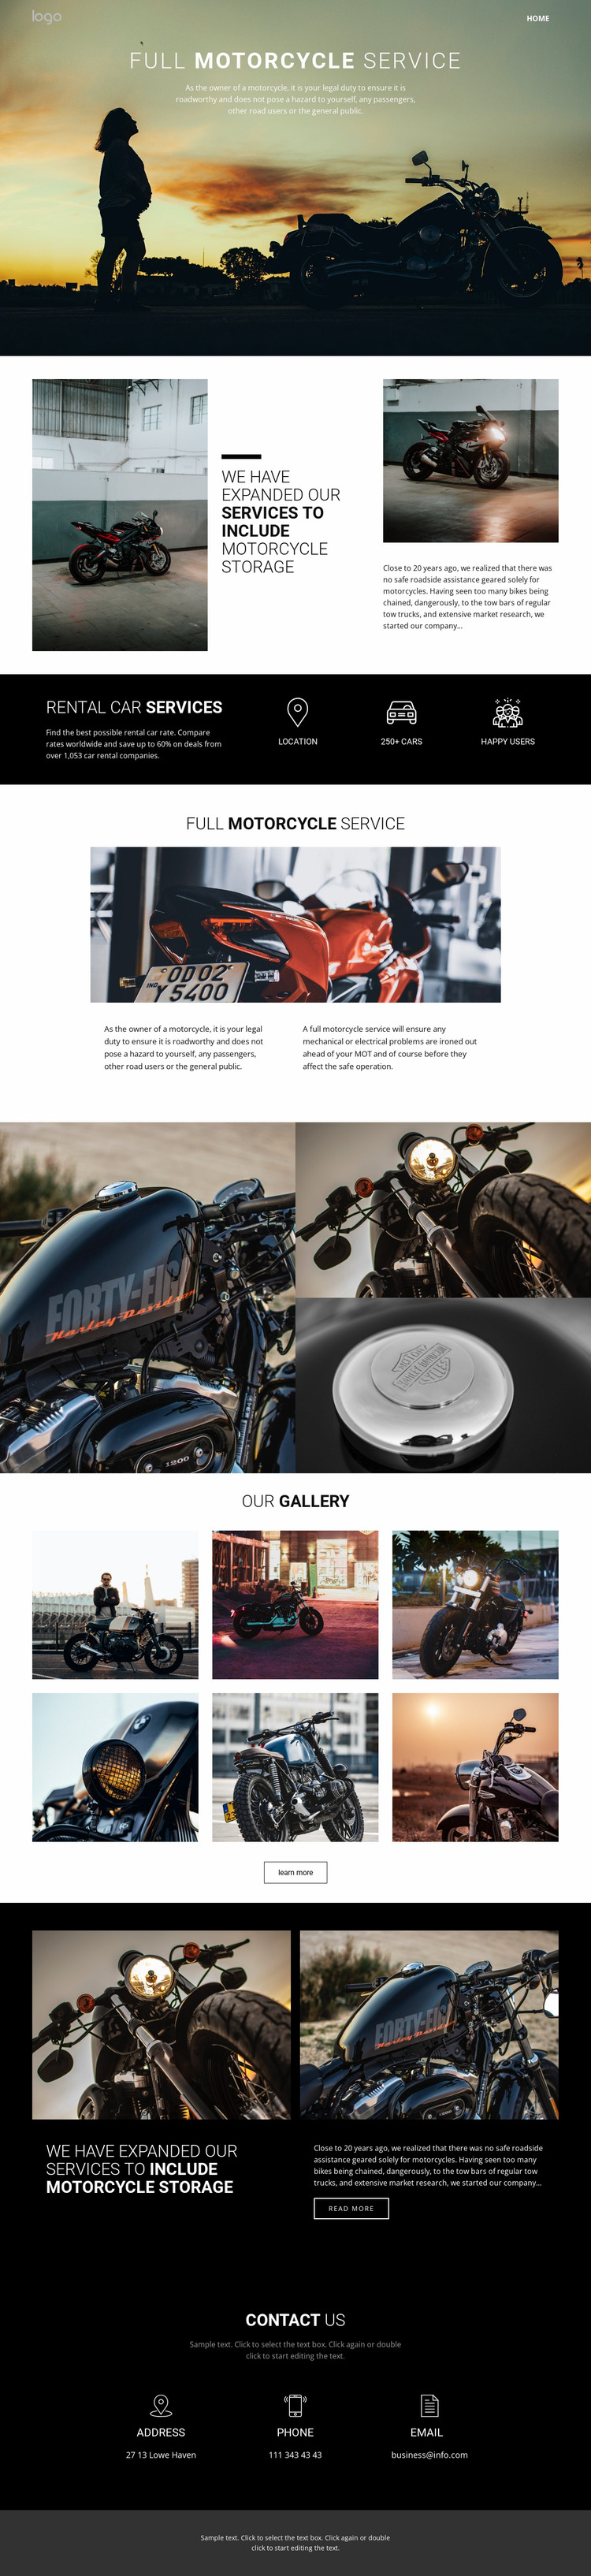 Caring for cycles and cars Website Mockup